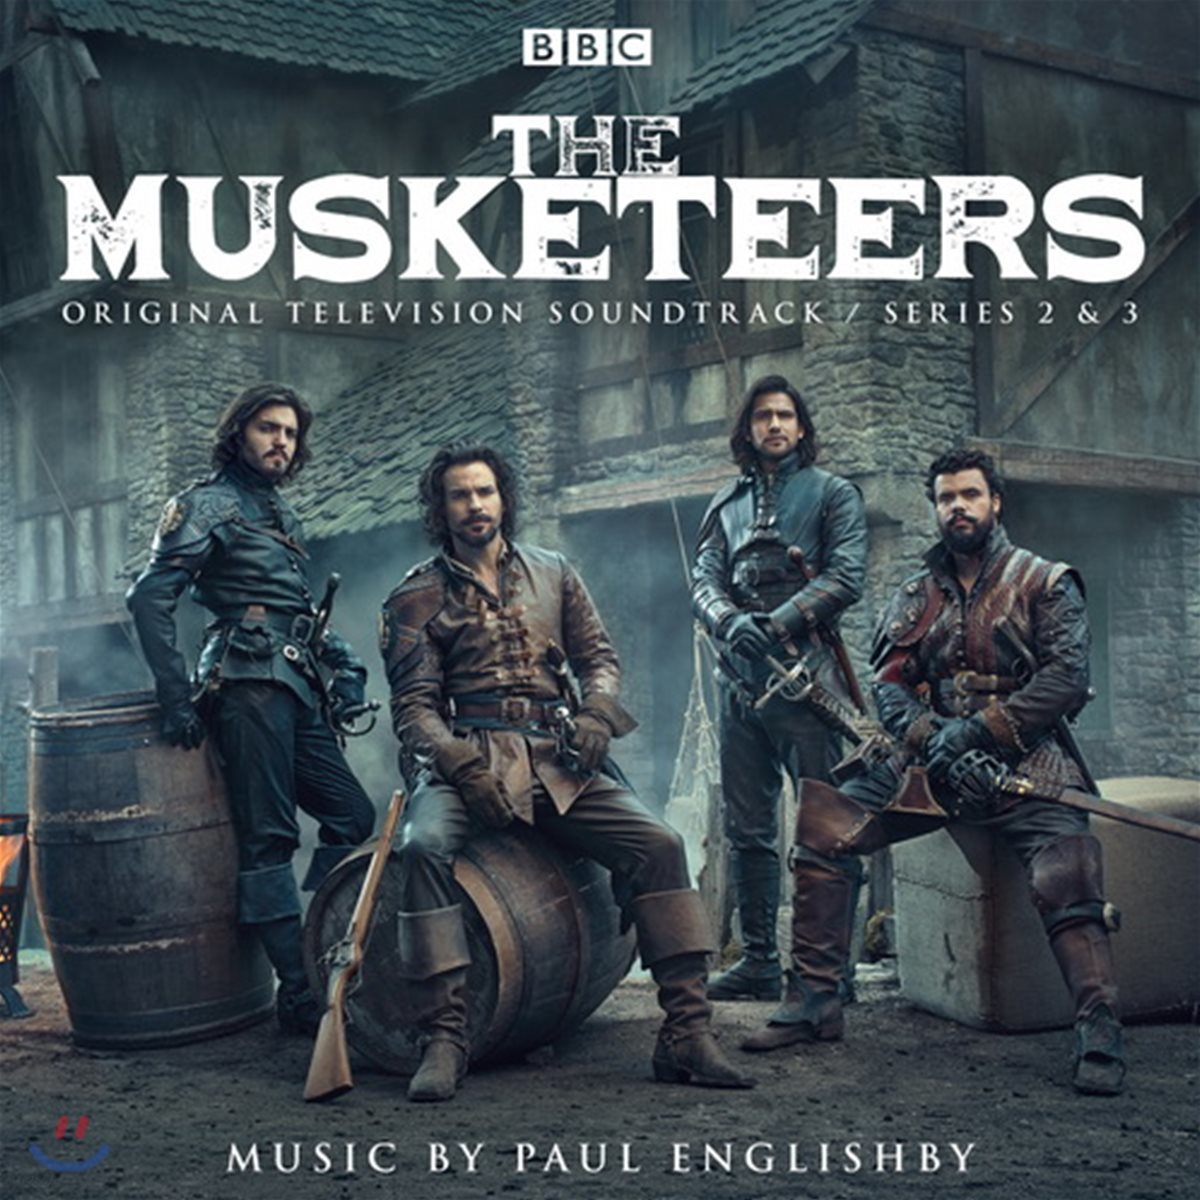 Paul Englishby (폴 잉글리쉬비) - 삼총사 시즌 2 &amp; 3 - TV 음악 (The Musketeers : Original TV Soundtrack Series 2 &amp; 3 OST)